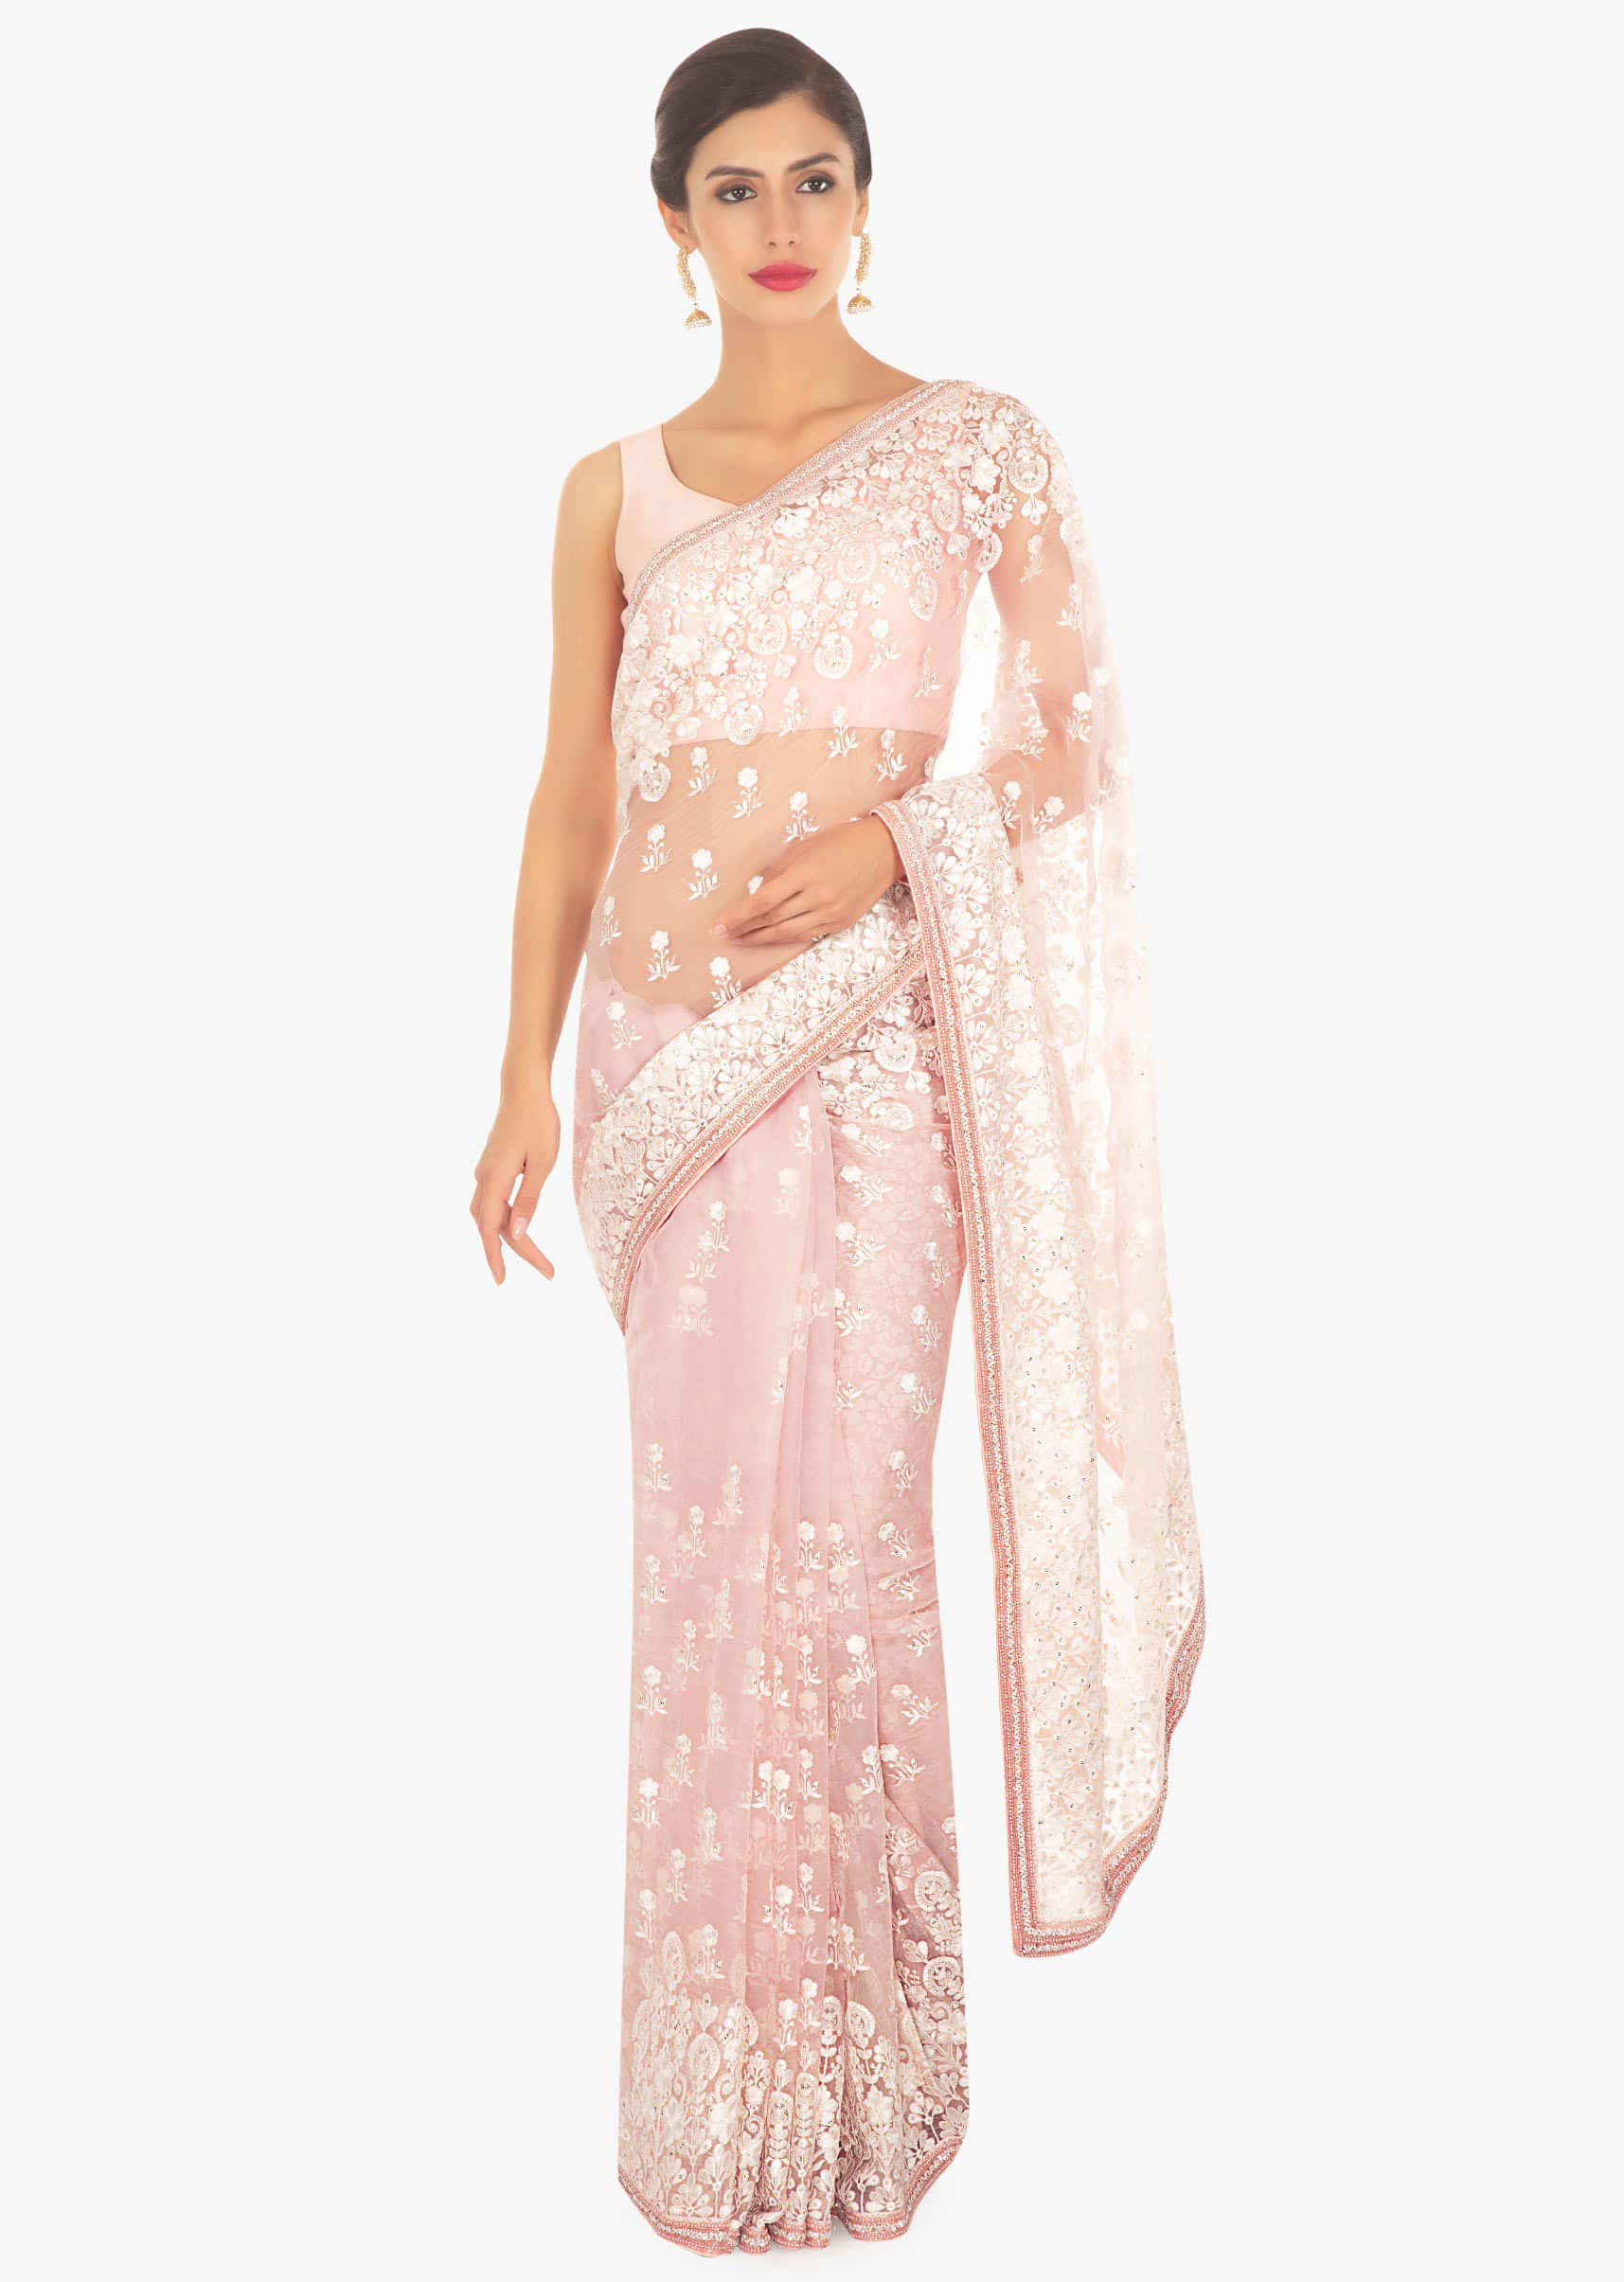 Crepe pink organza saree in white thread embroidered butti and border